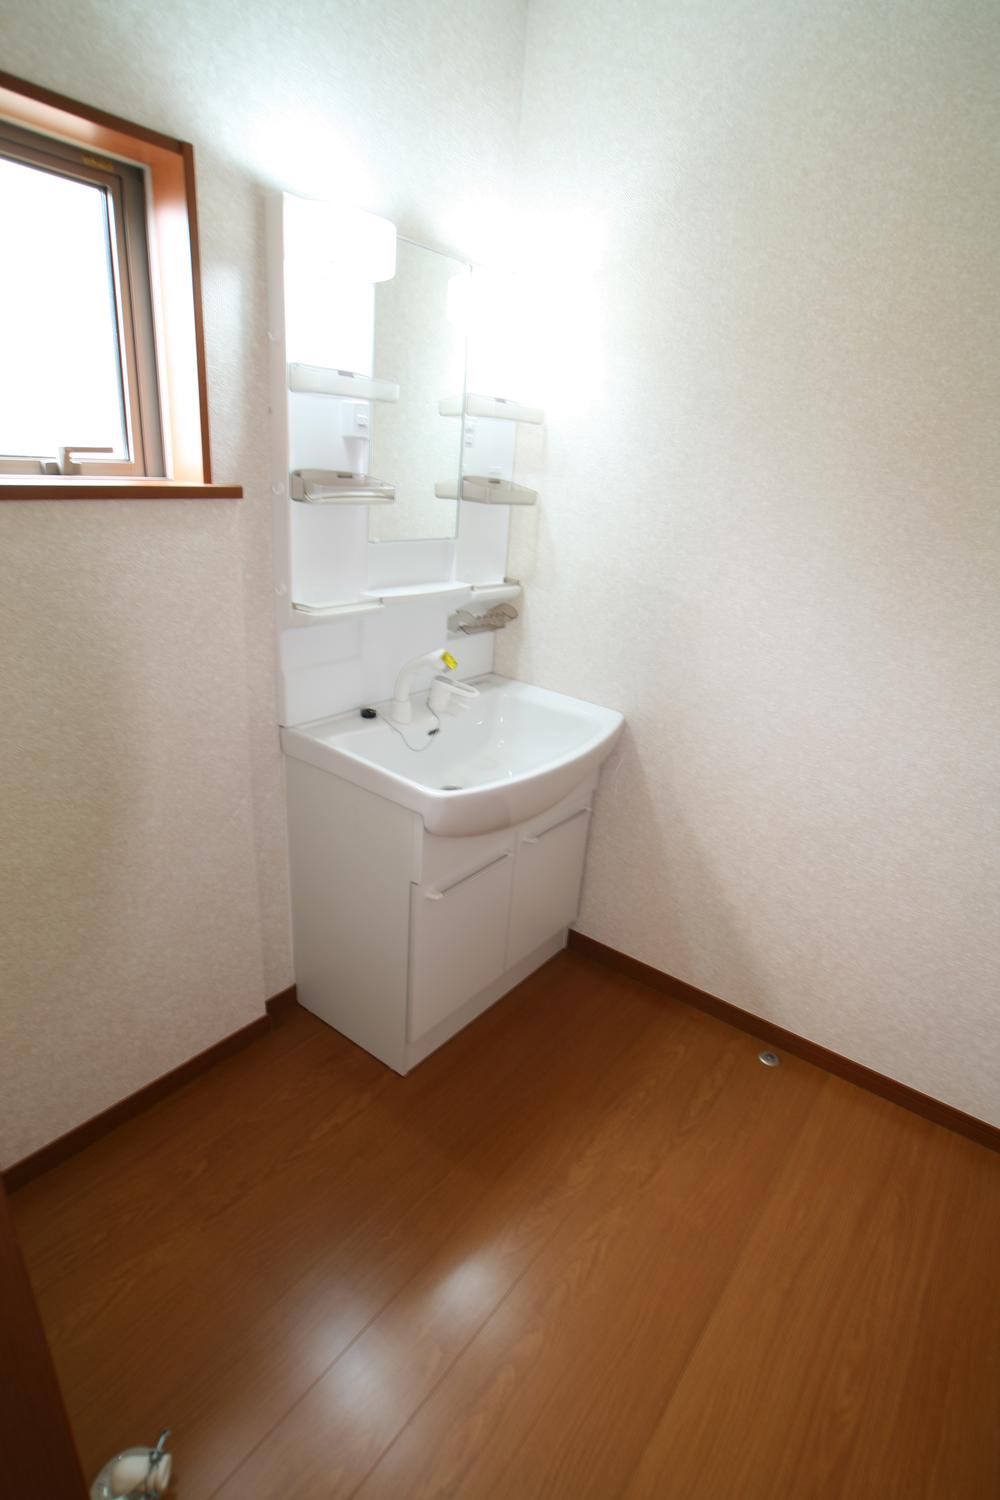 Same specifications photos (Other introspection). Wash room with its construction cases wash room cleanliness. Convenient hand shower plug in wash basin in the morning Shan with anti-fog heaters